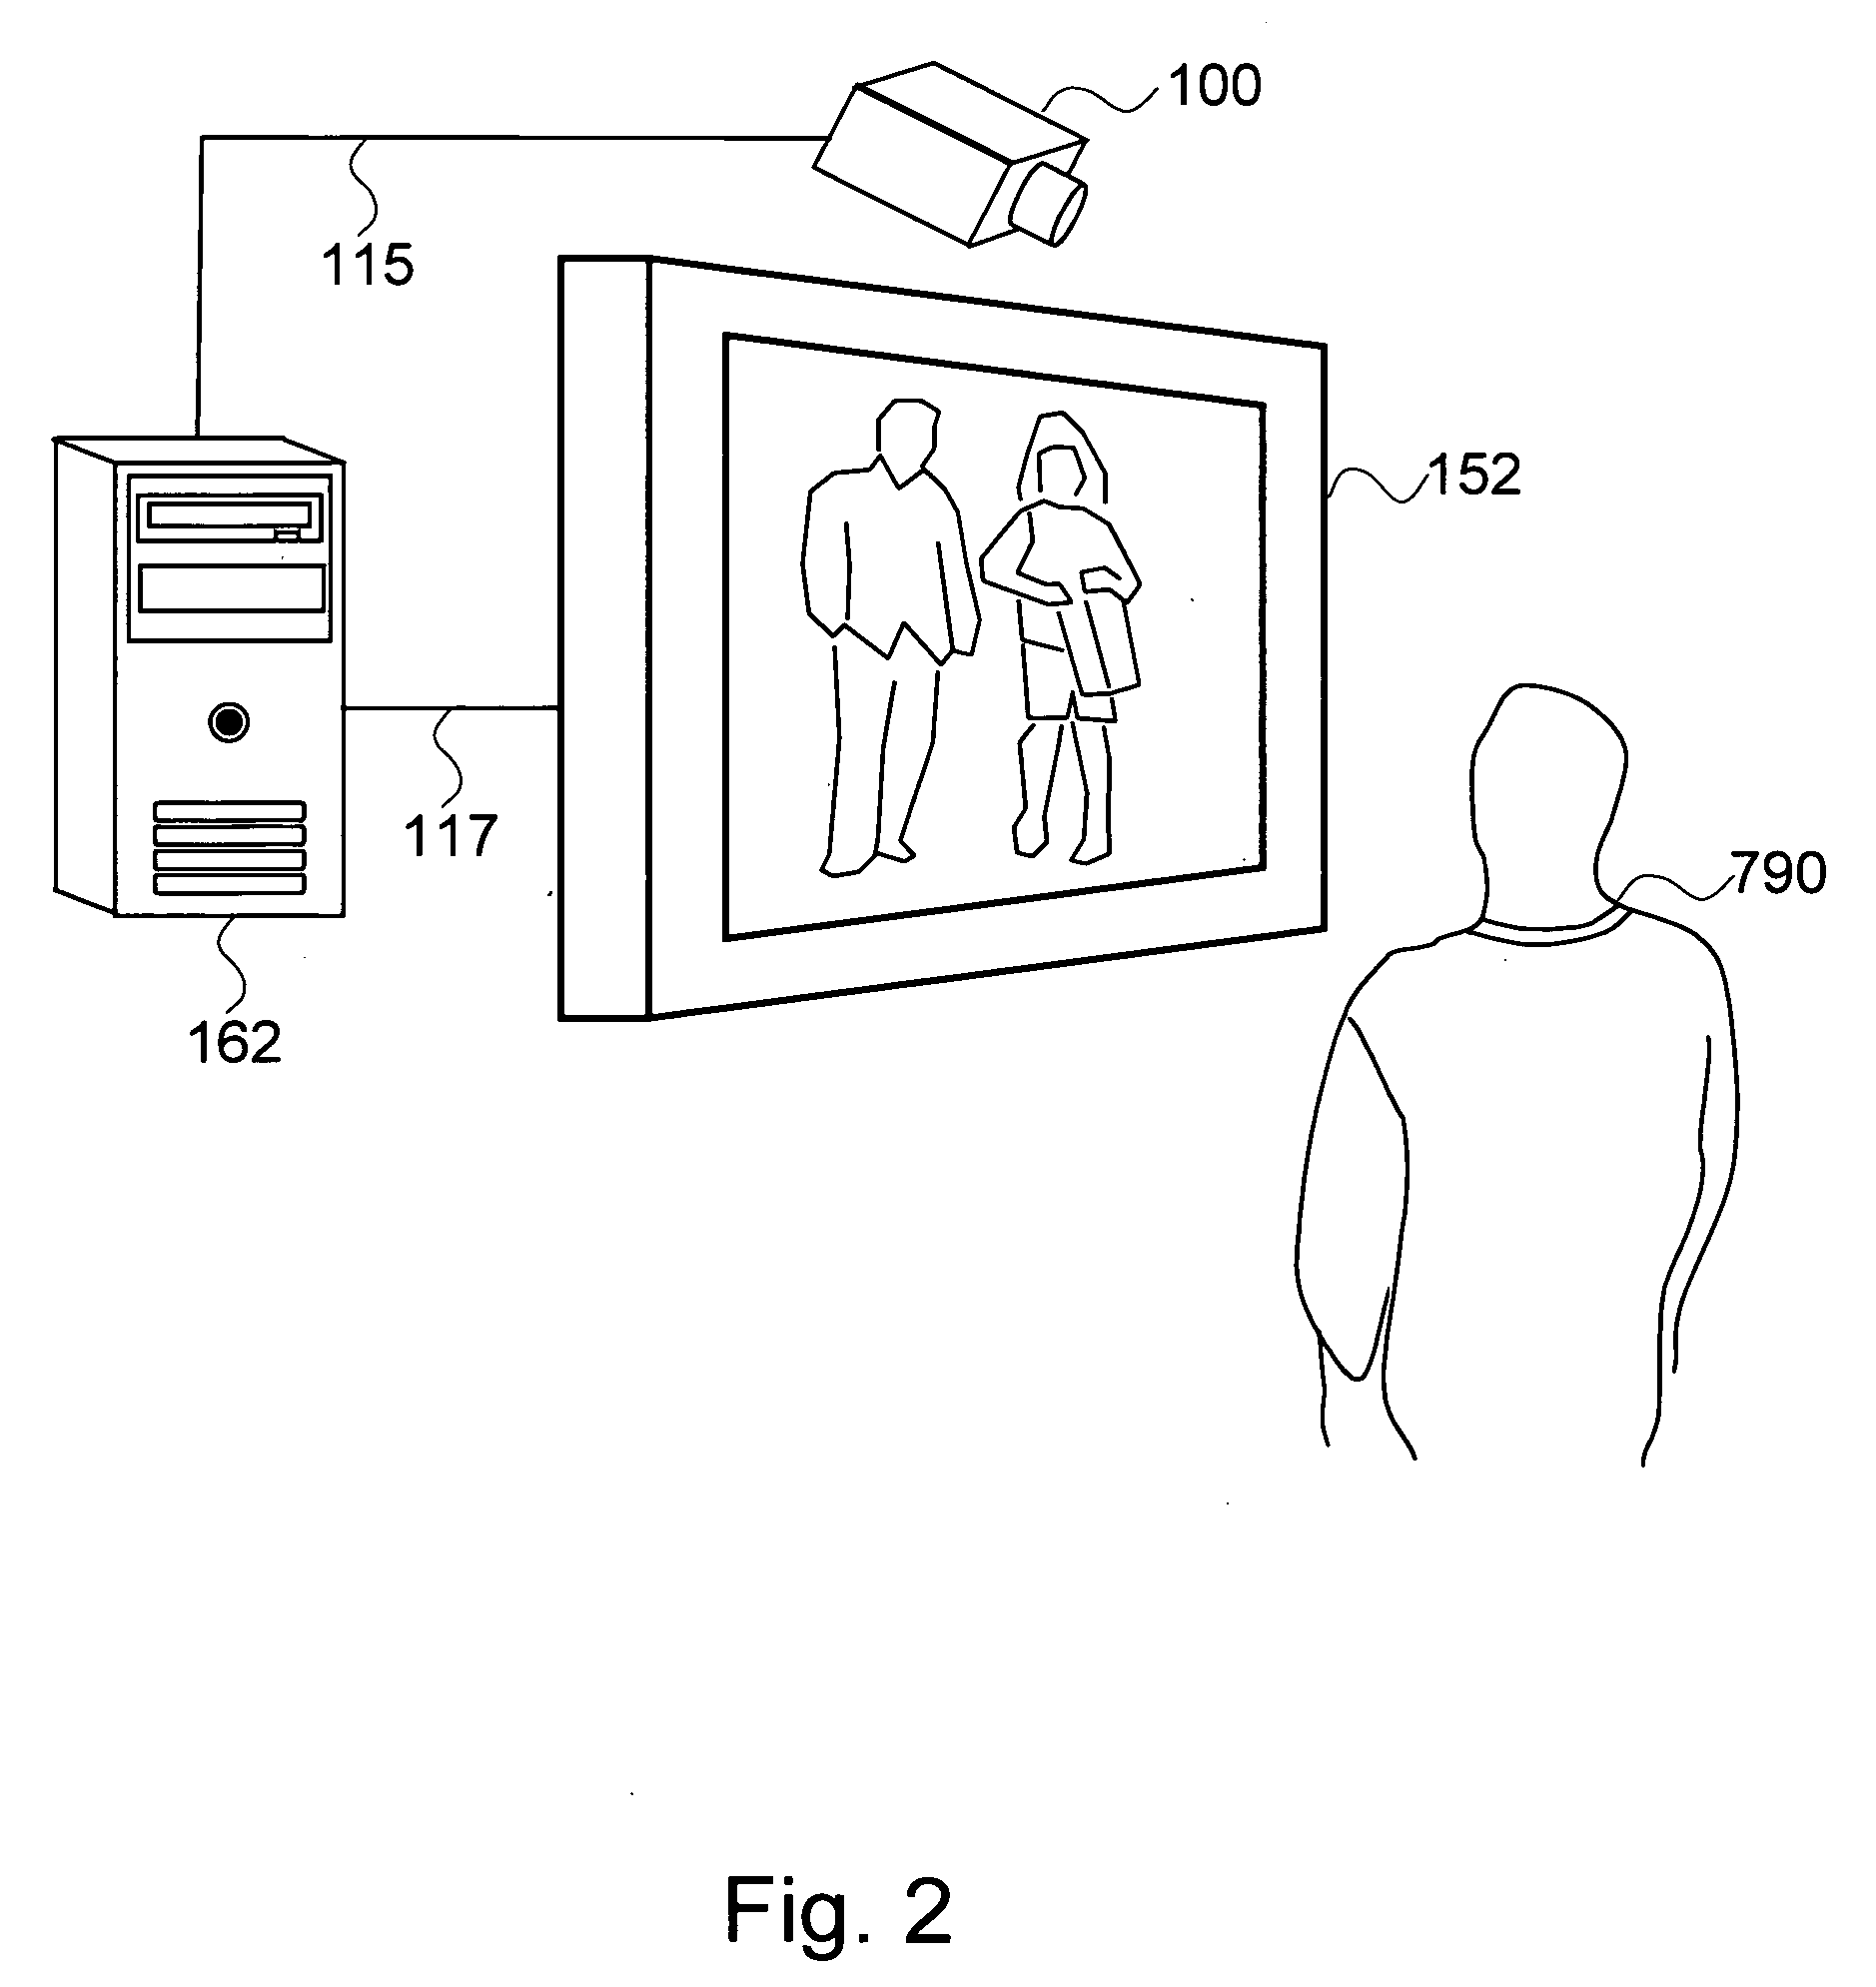 Method and system for measuring human response to visual stimulus based on changes in facial expression